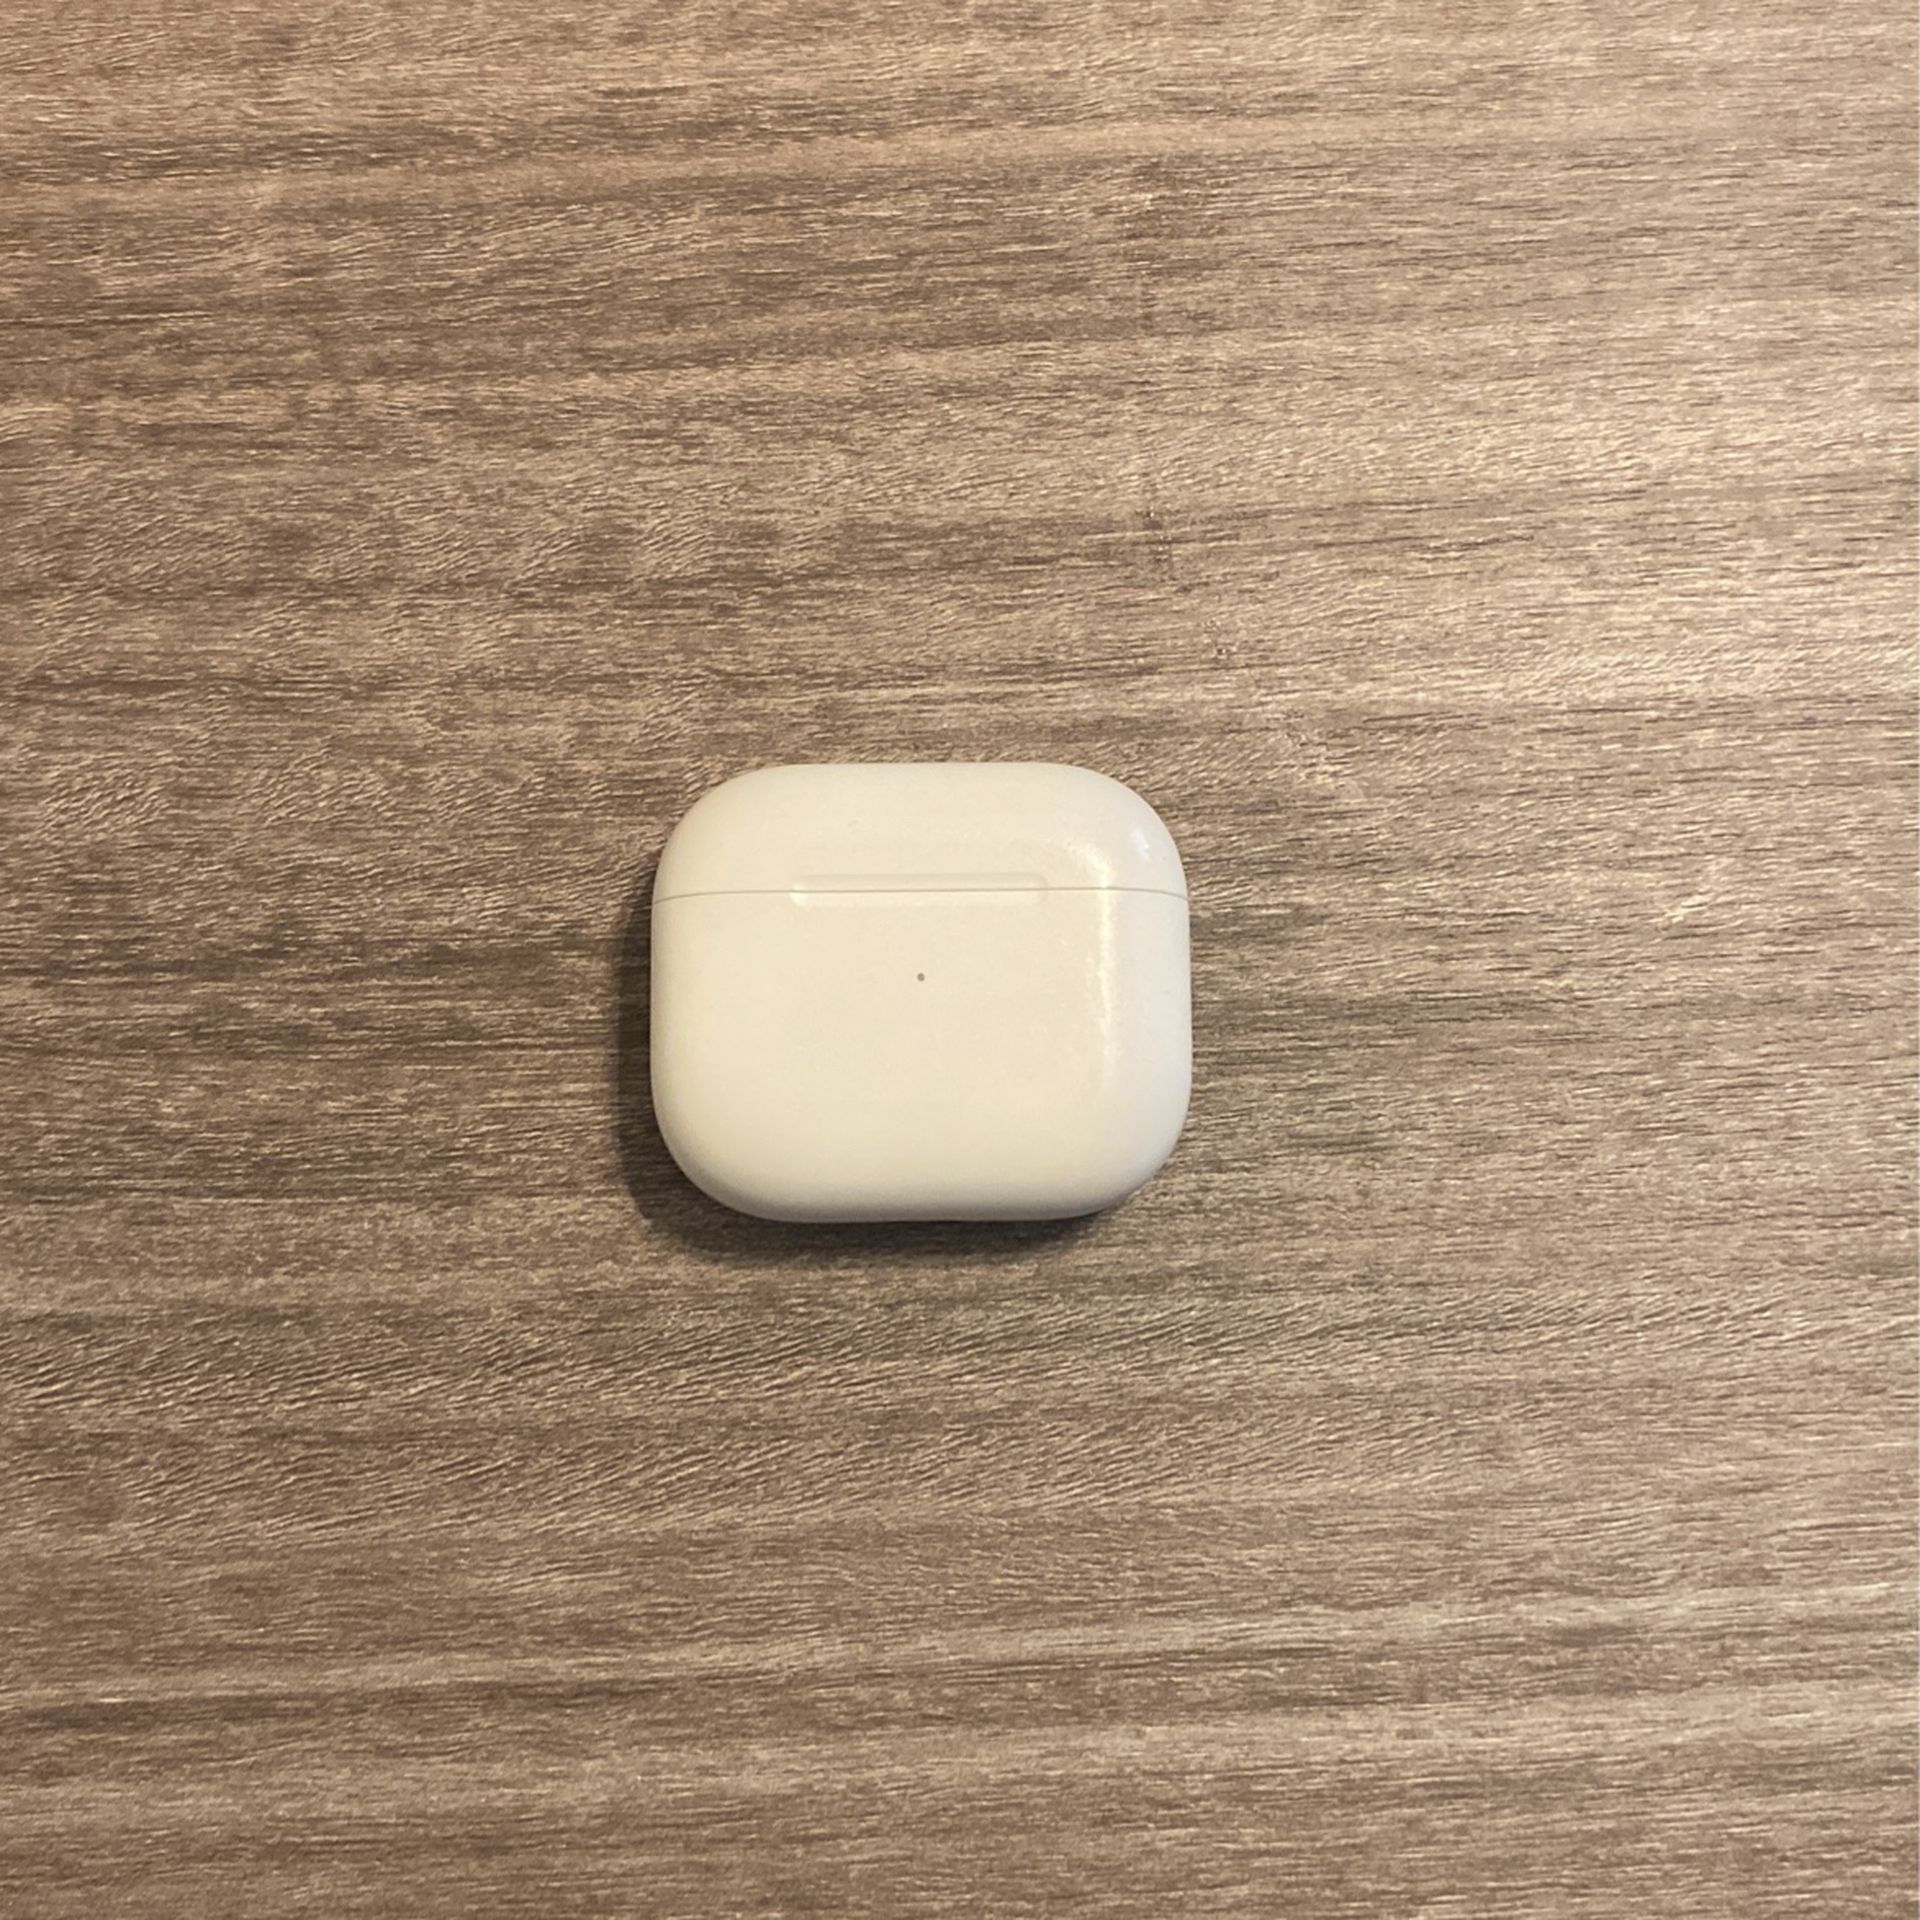 Apple AirPods (3rd generation)  